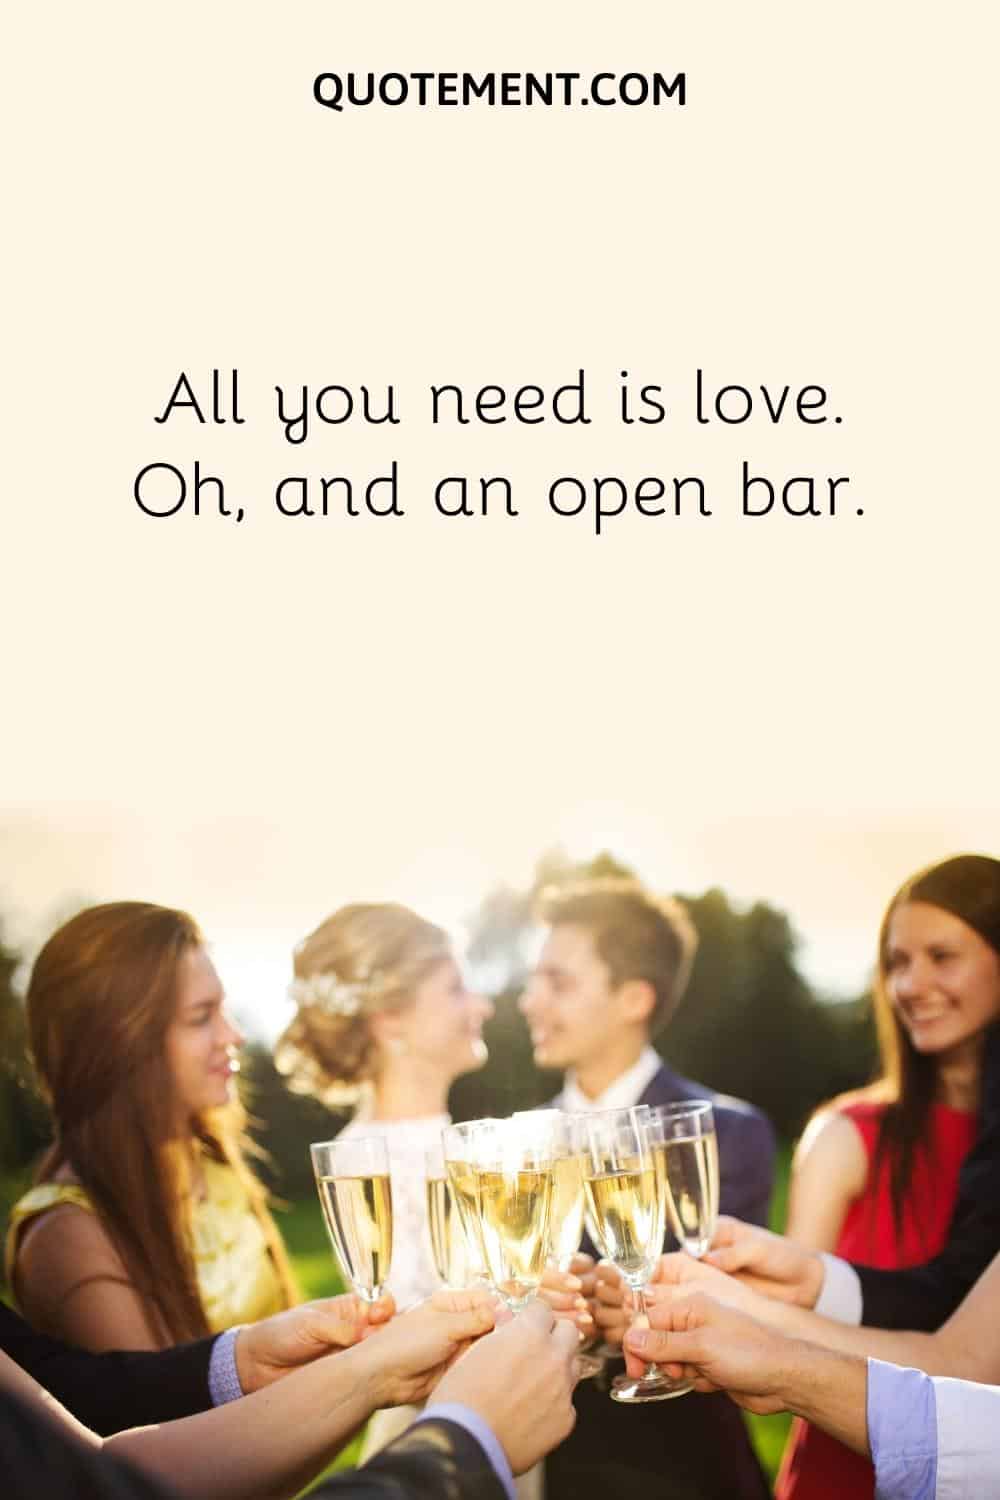 All you need is love. Oh, and an open bar.